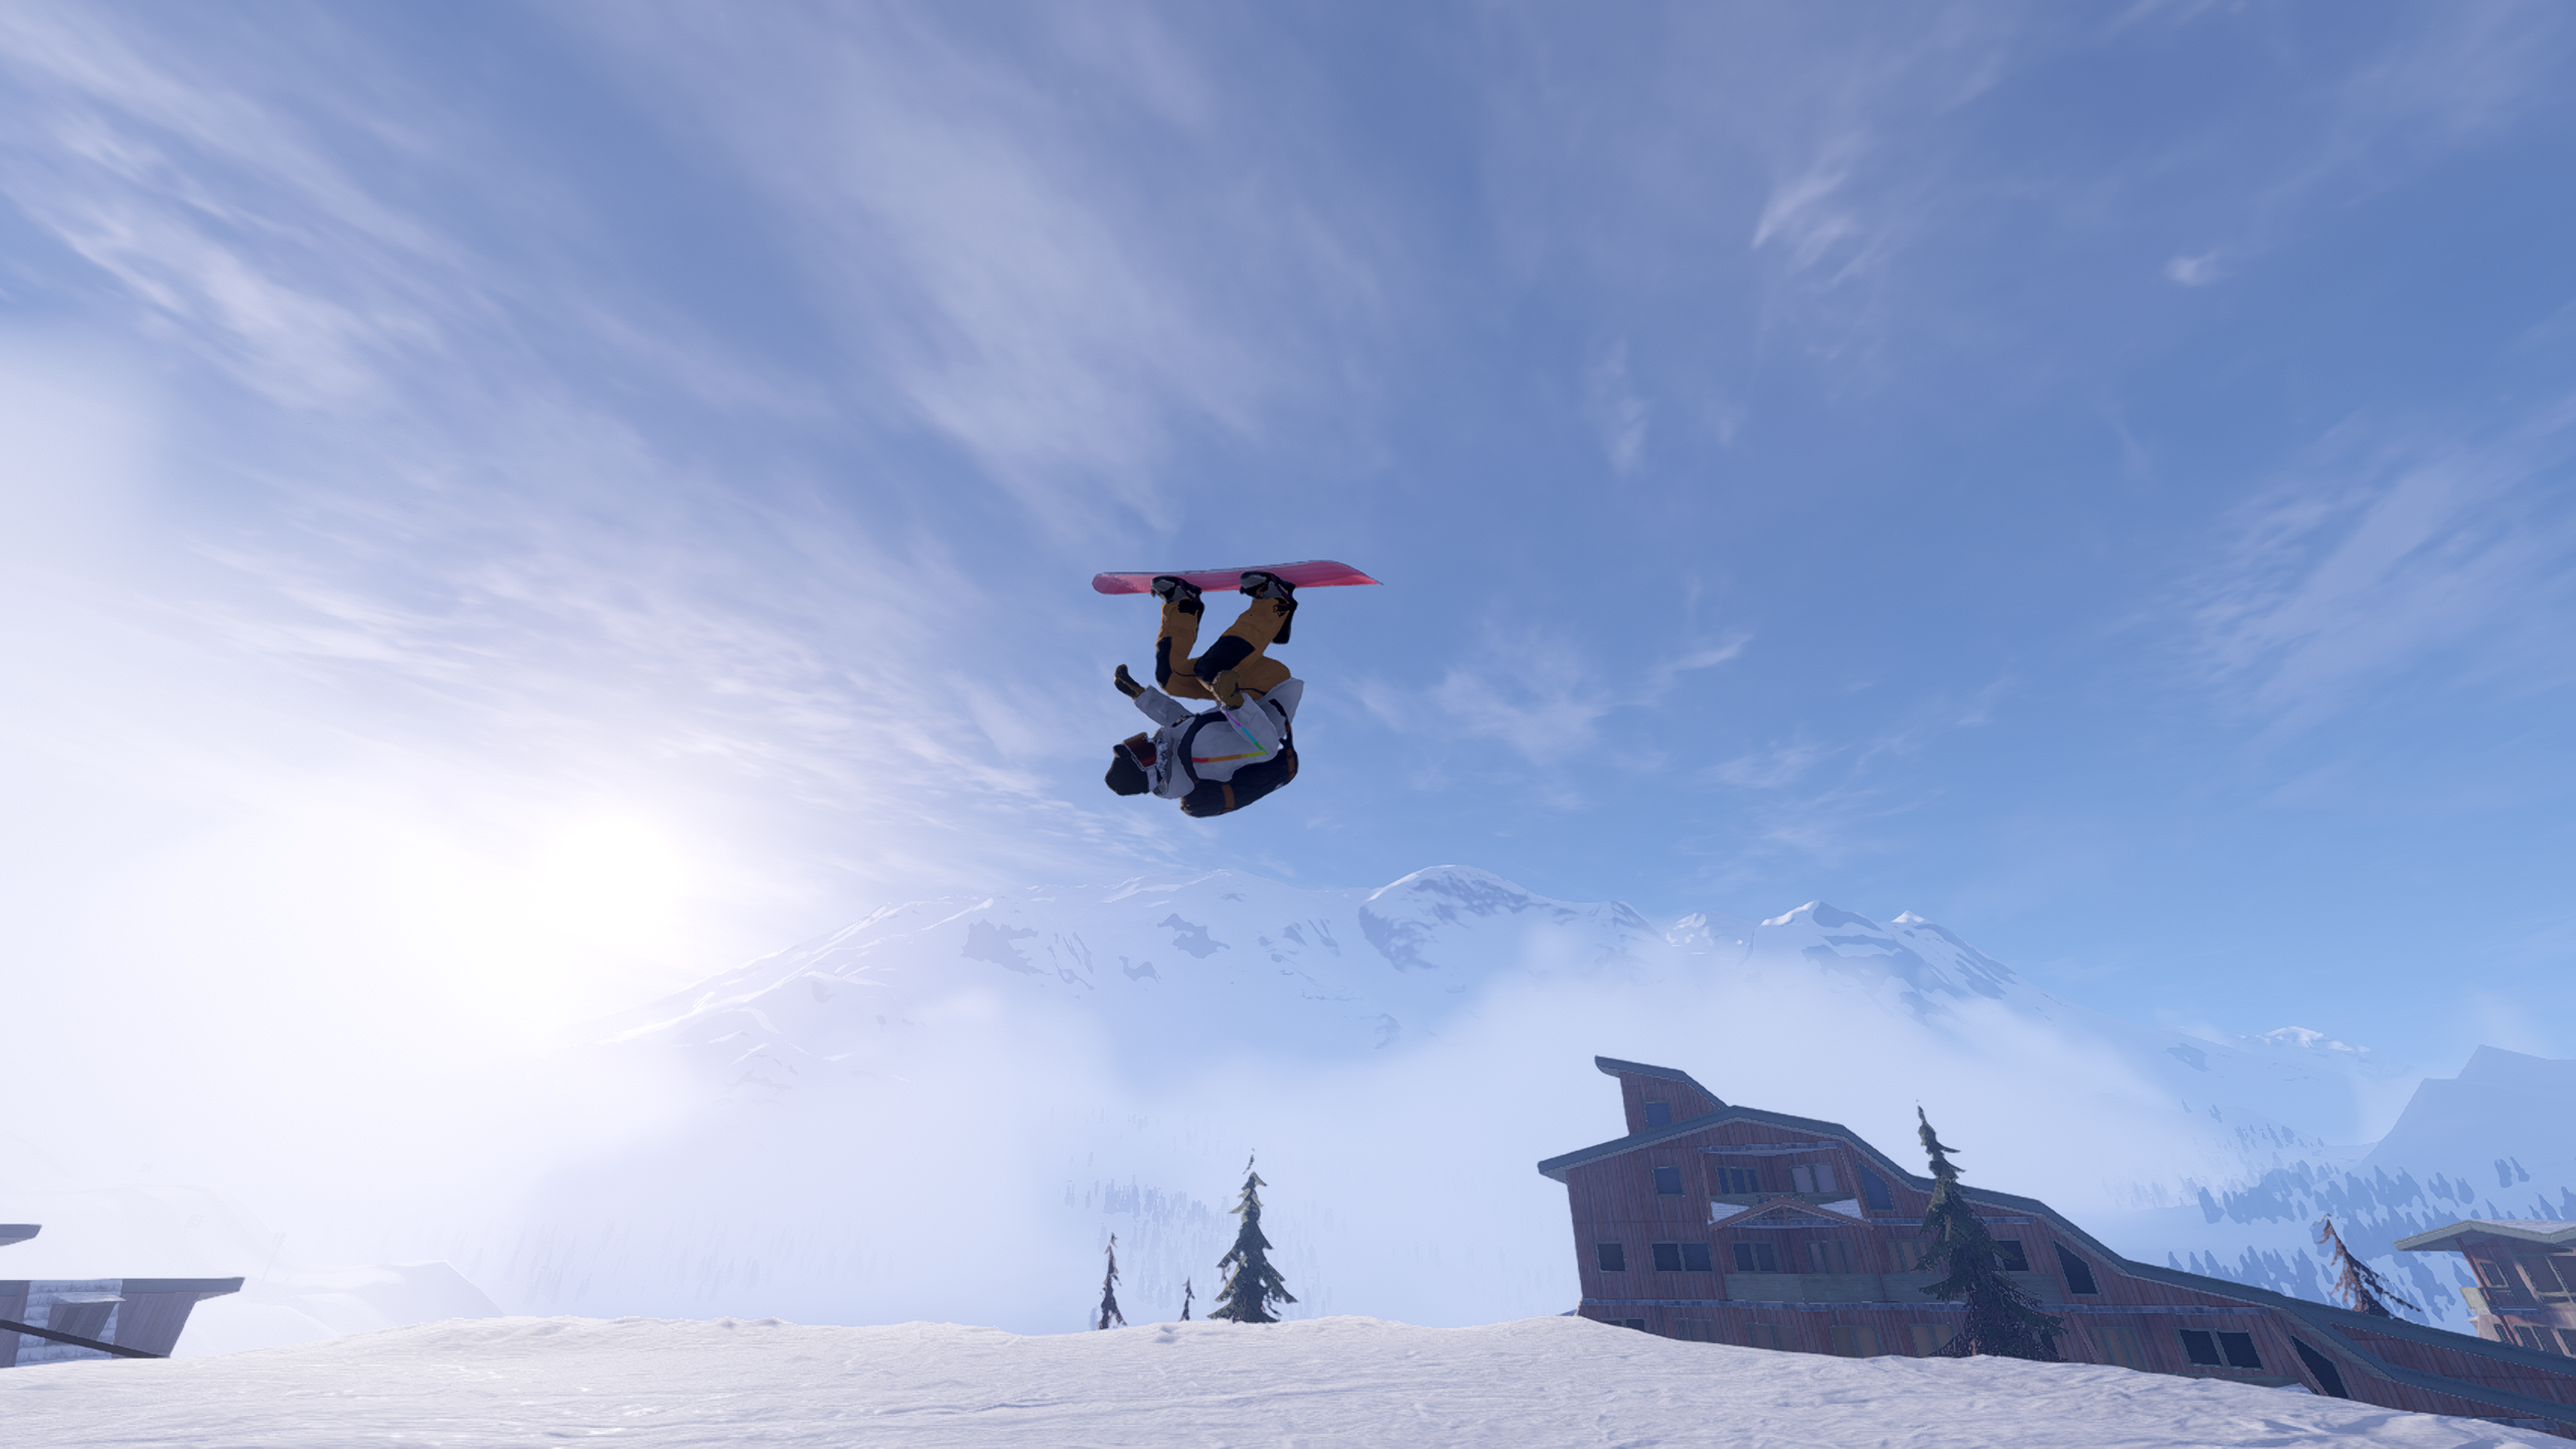 A snowboarder performs a front flip and are mid trick totally inverted mid air. They are riding on a red snowboard wearing a white jacket, mustard trousers and a black backpack on their back. The mid-ground behind the snowboarder has some multistory wooden lodge style buildings. The far background has some high rocky mountains covered in snow and engulfed in low lying cloud that the sun is shining through. 